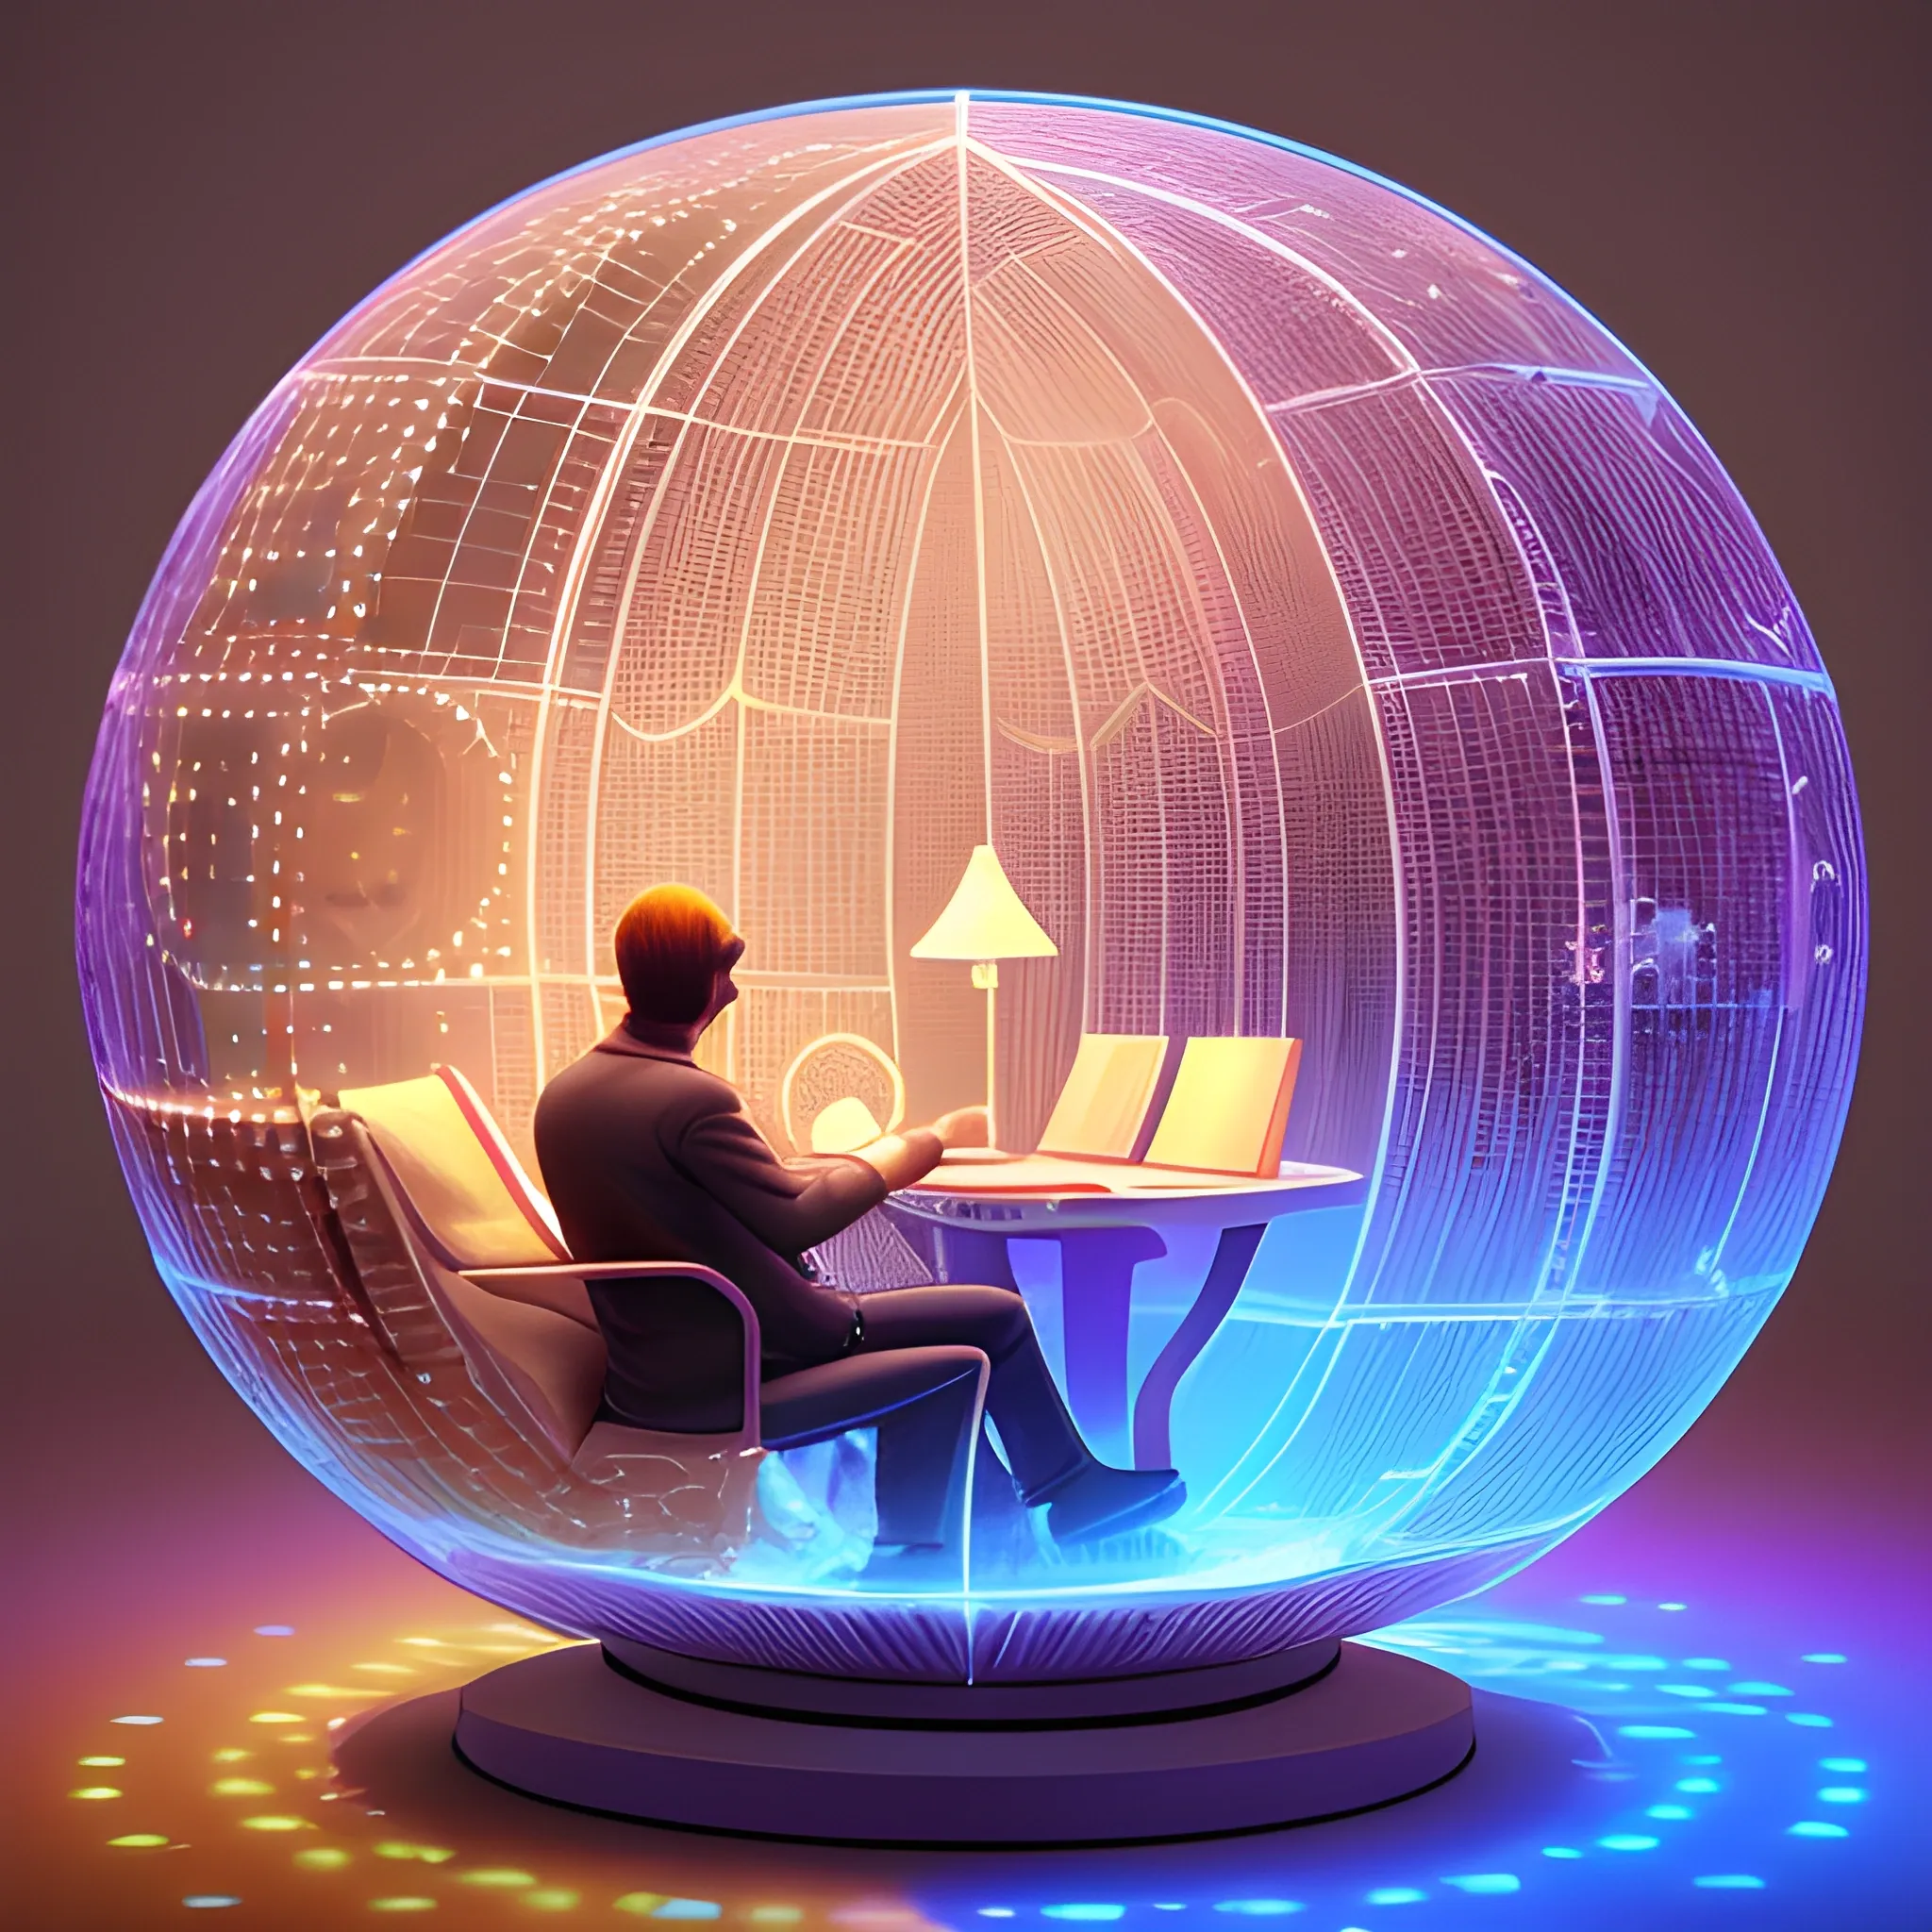 A programmer sits in a futuristic, spherical chamber, surrounded by a mesmerizing latticework of colorful LED lights. The air is filled with a soft hum, as if the computer is generating an infinite stream of pulsing, iridescent hues. A virtual 3D globe floats in front of the programmer, its surface a kaleidoscope of shifting color palettes, each one a complex tapestry of 3D models, textures, and animations. The scene is bathed in a warm, ambient light, as if the colors themselves were radiating a gentle glow.